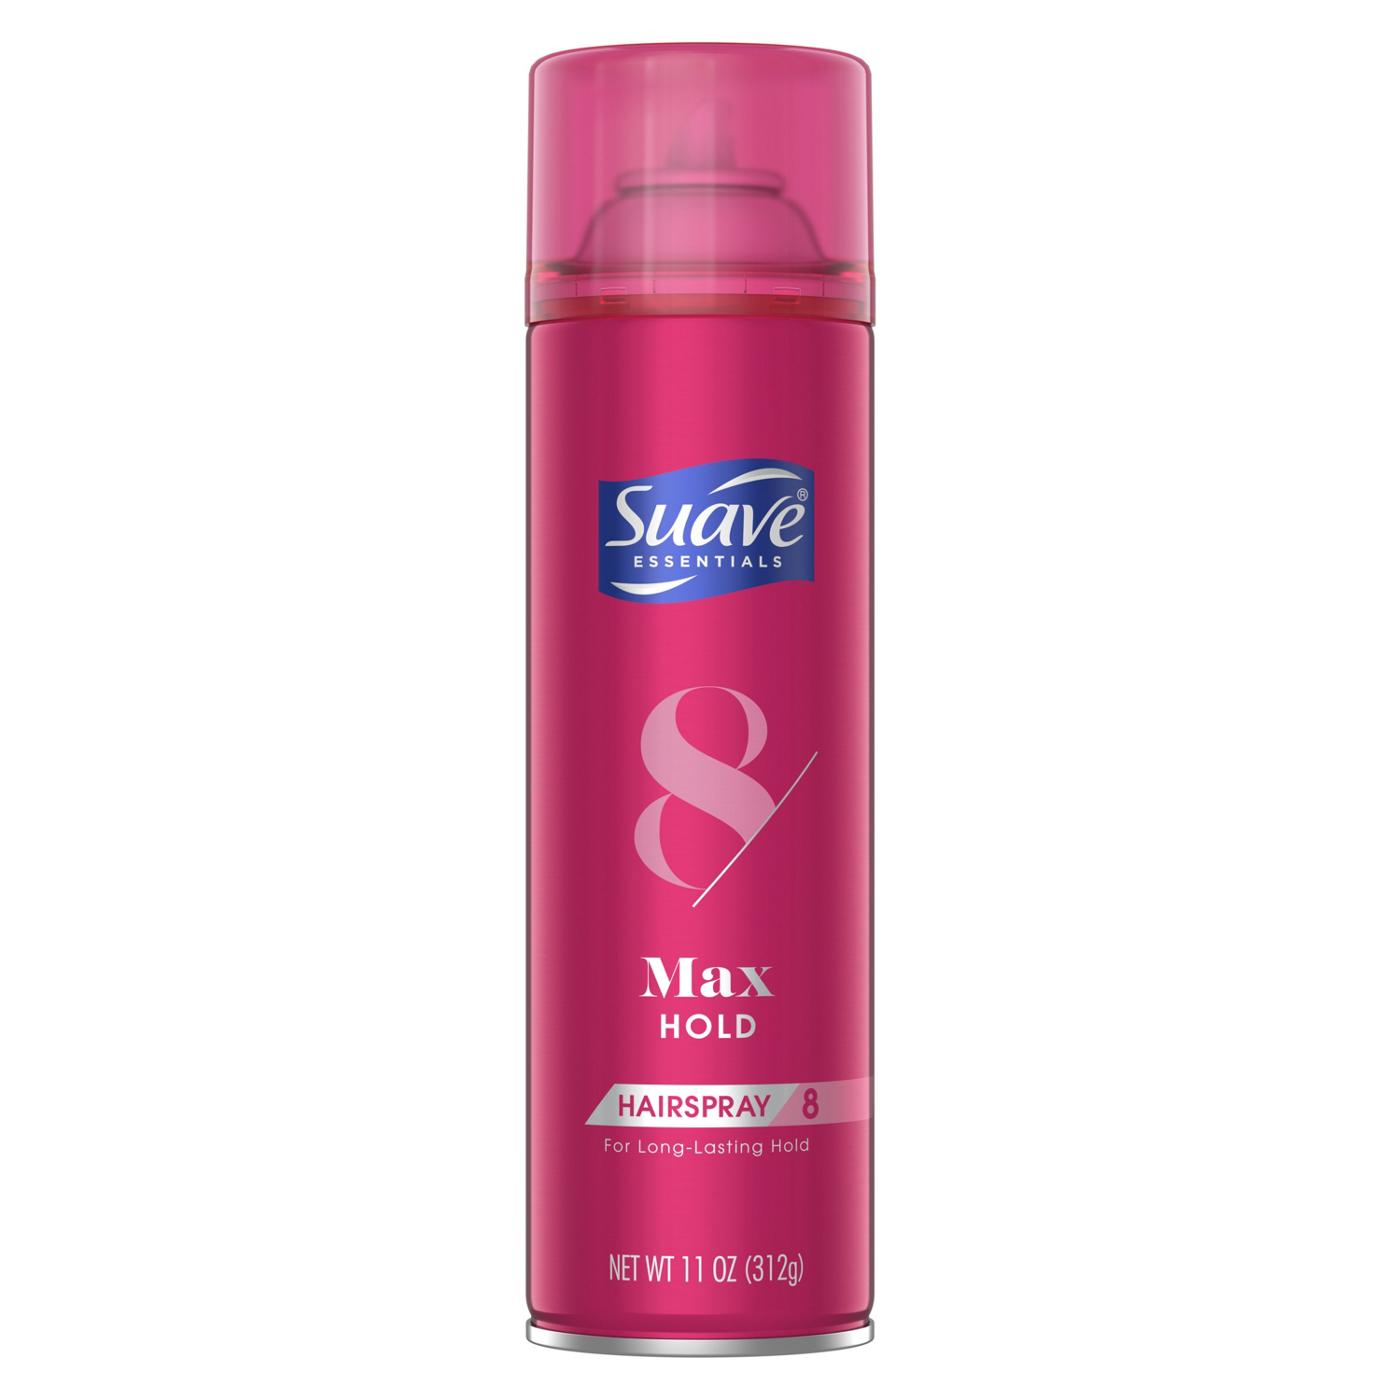 Suave Hairspray Max Hold; image 1 of 2